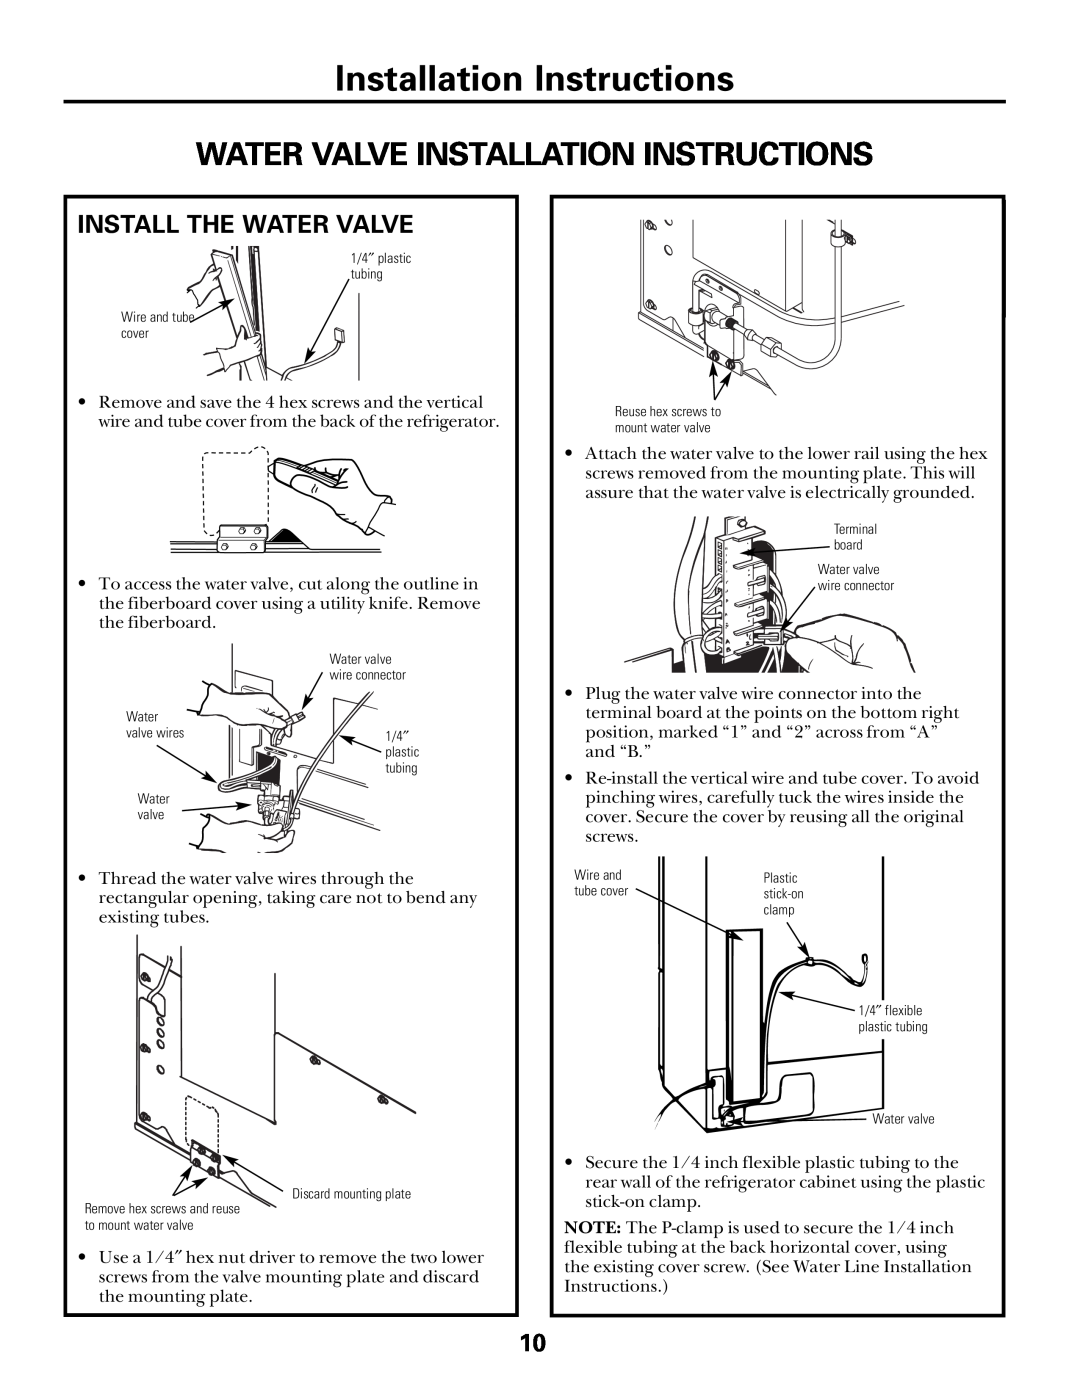 GE UK-KIT-3S owner manual Water Valve Installation Instructions, Install The Water Valve 